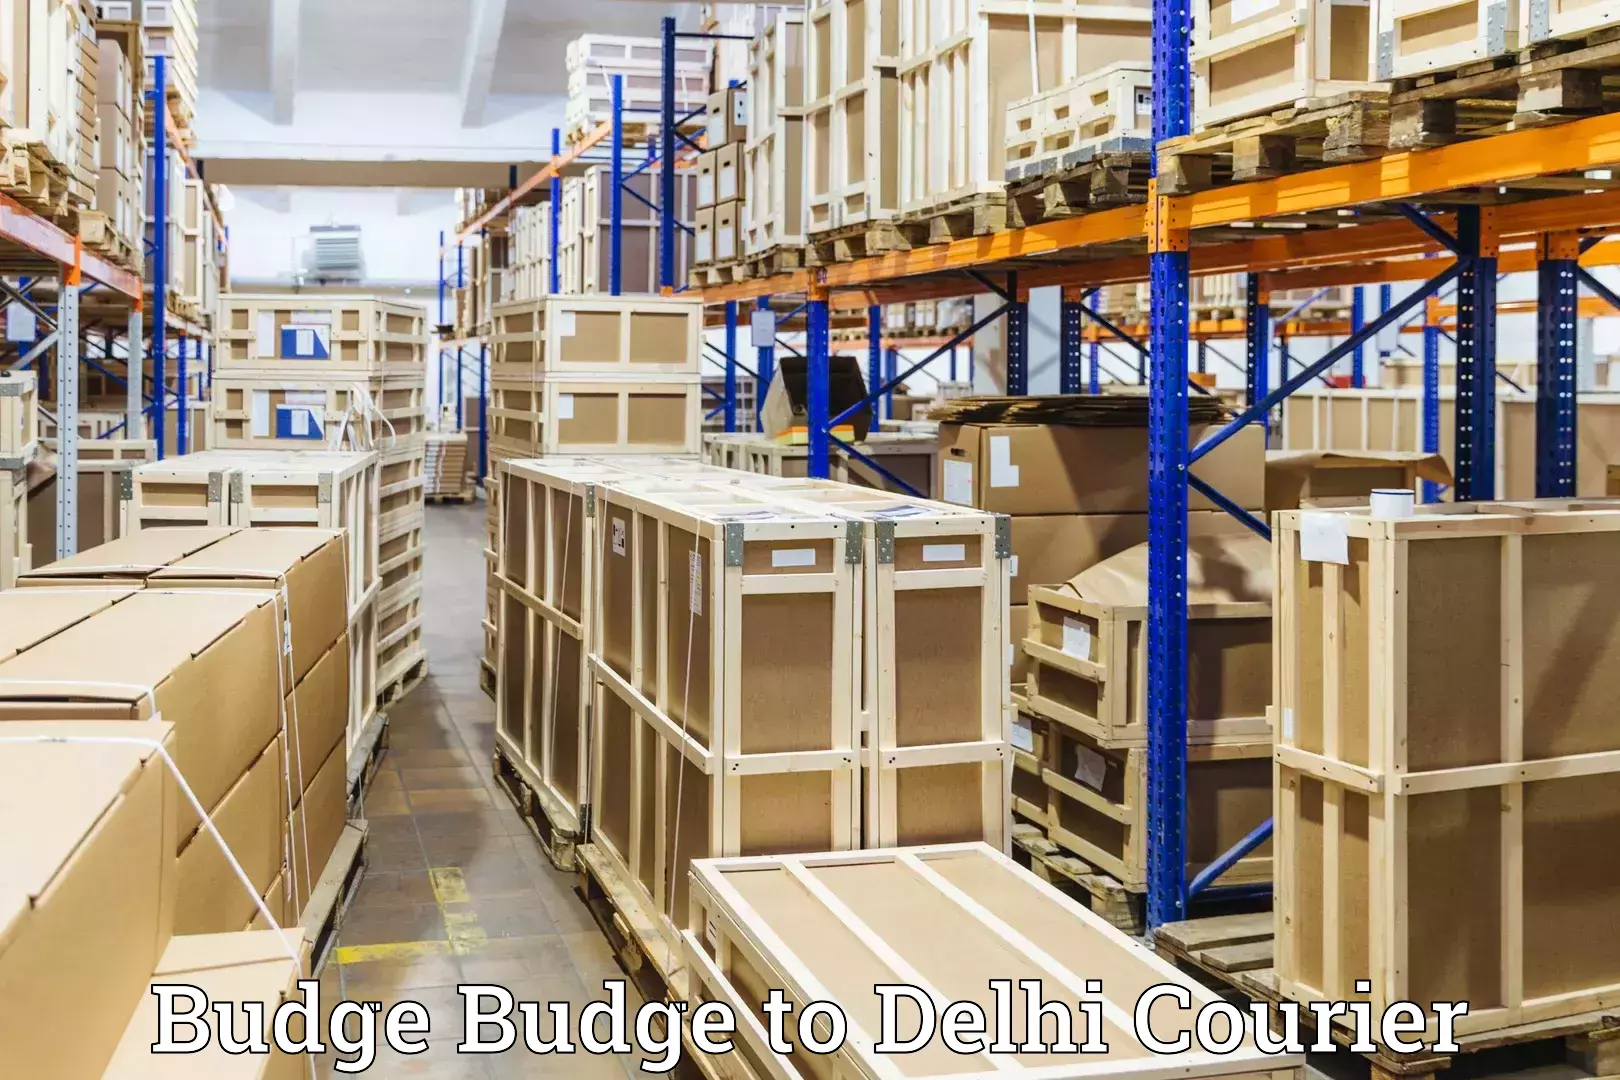 Automated luggage transport in Budge Budge to University of Delhi